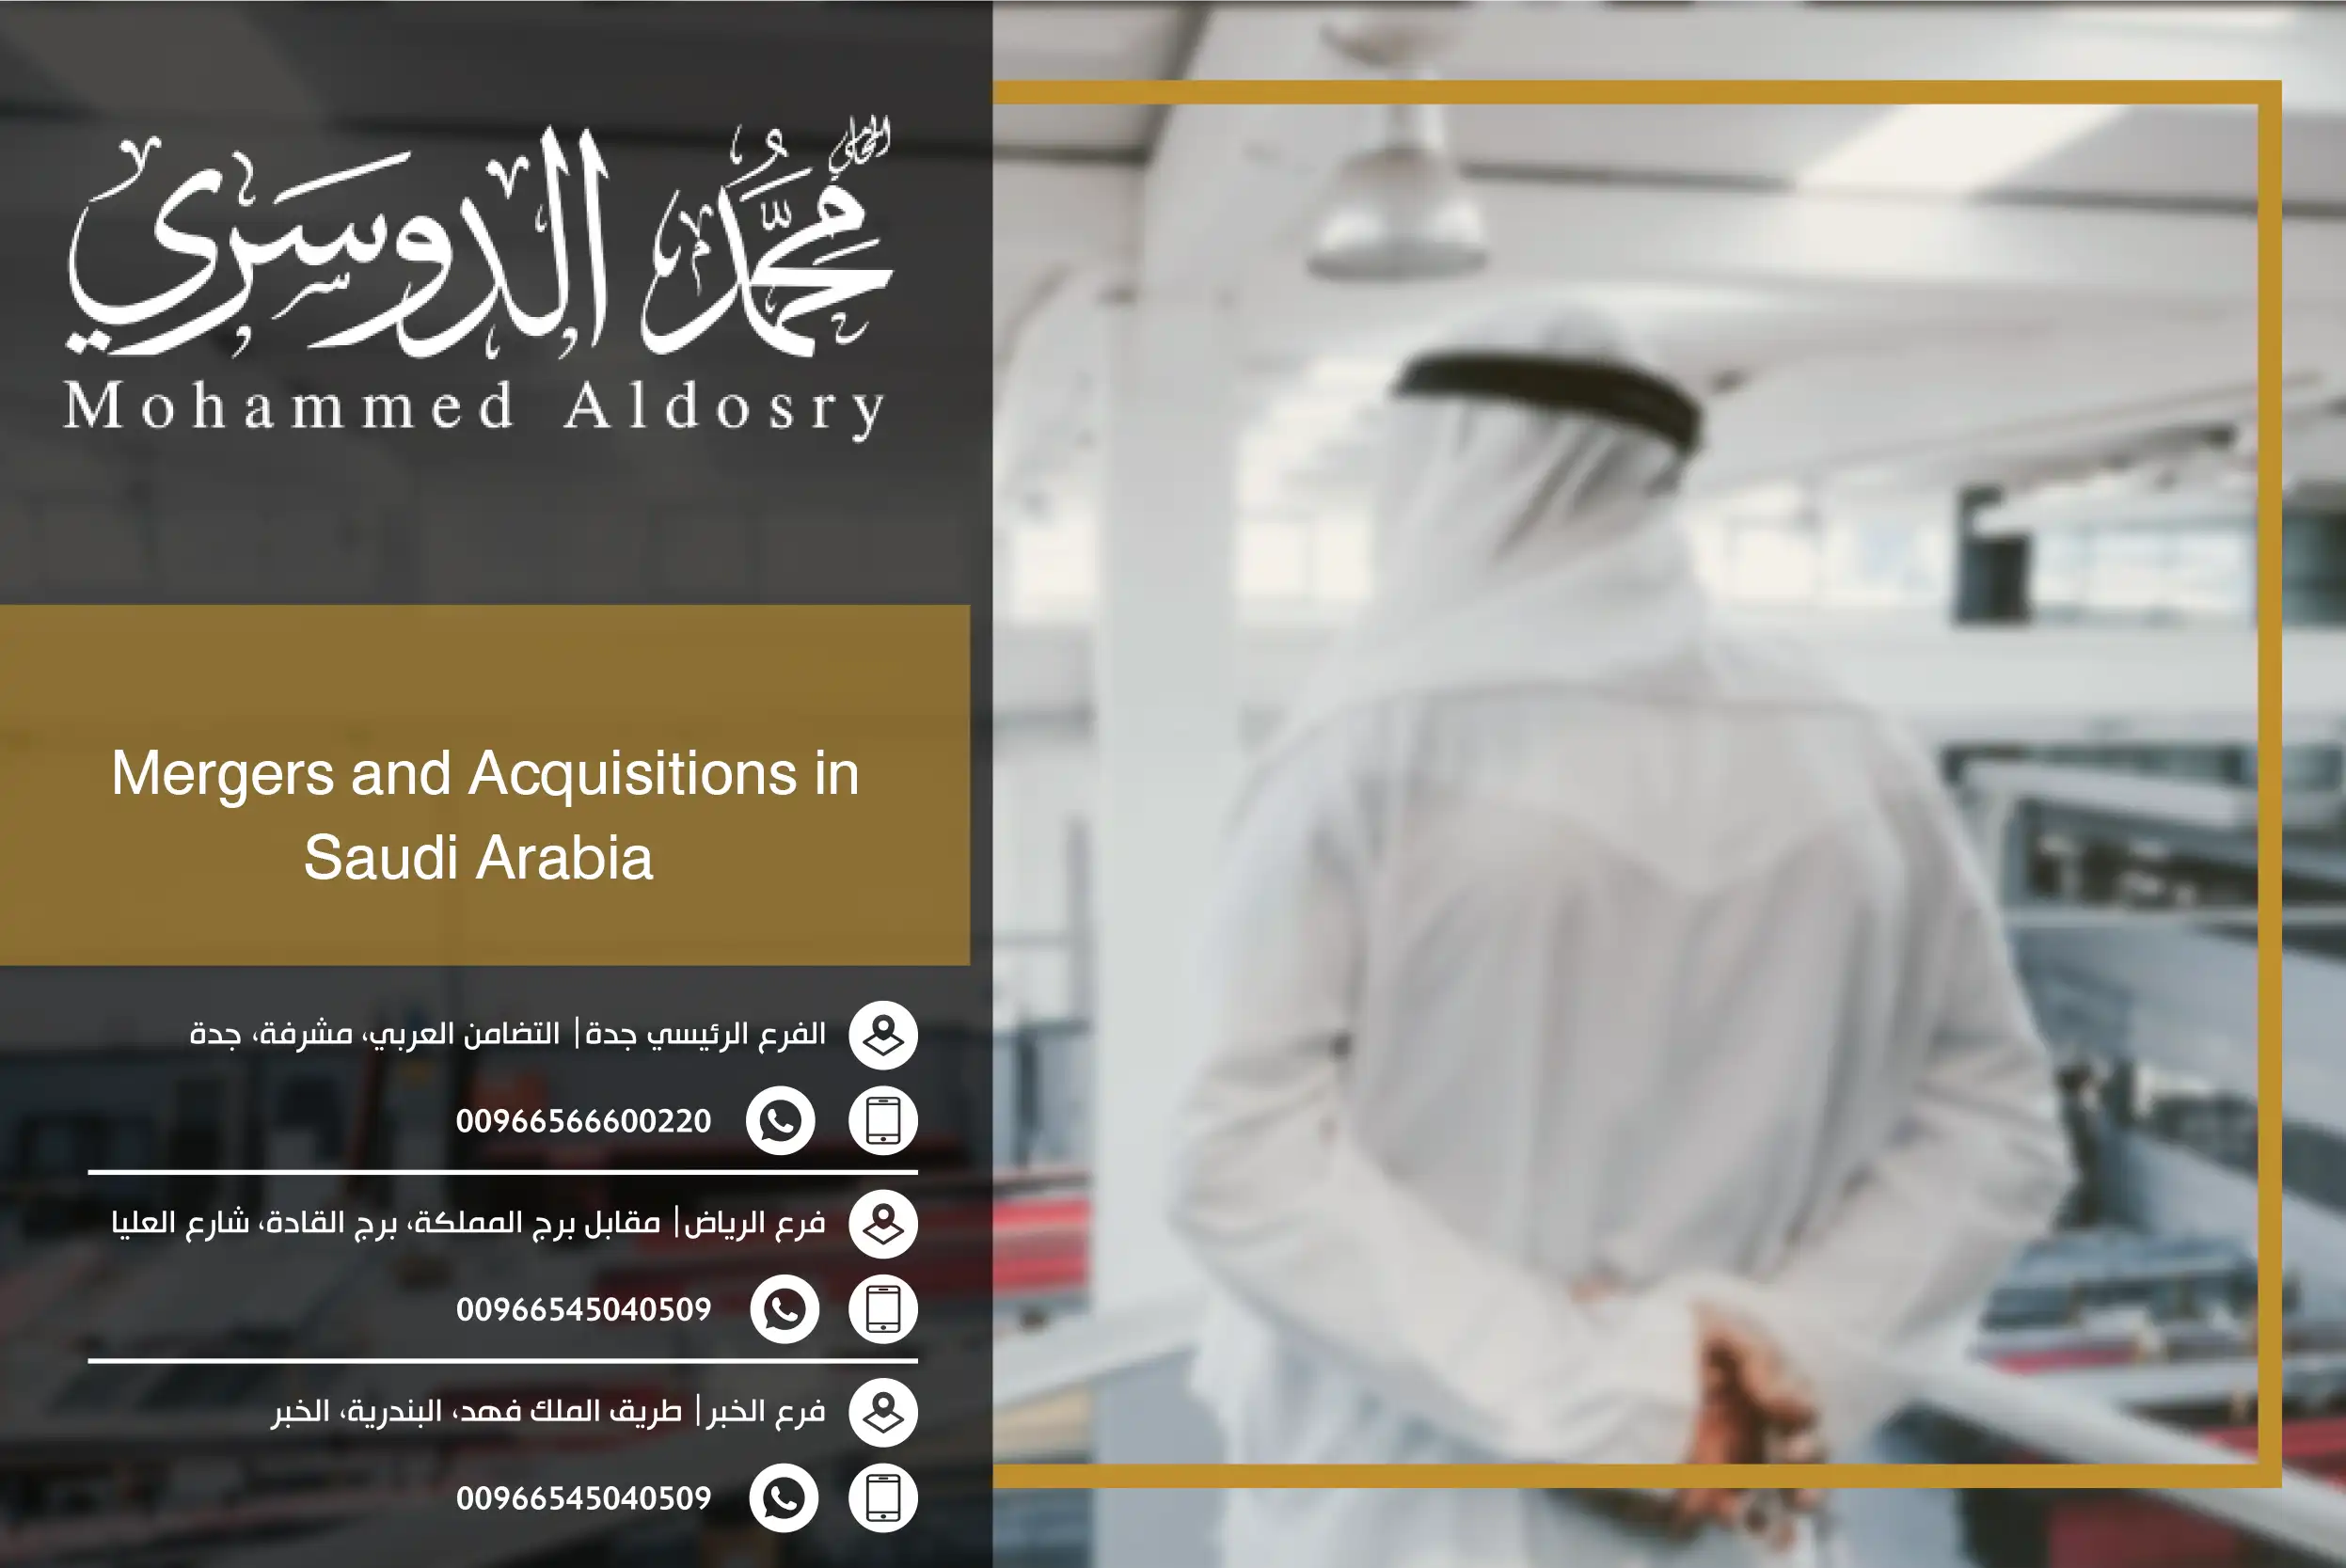 Mergers and Acquisitions in Saudi Arabia